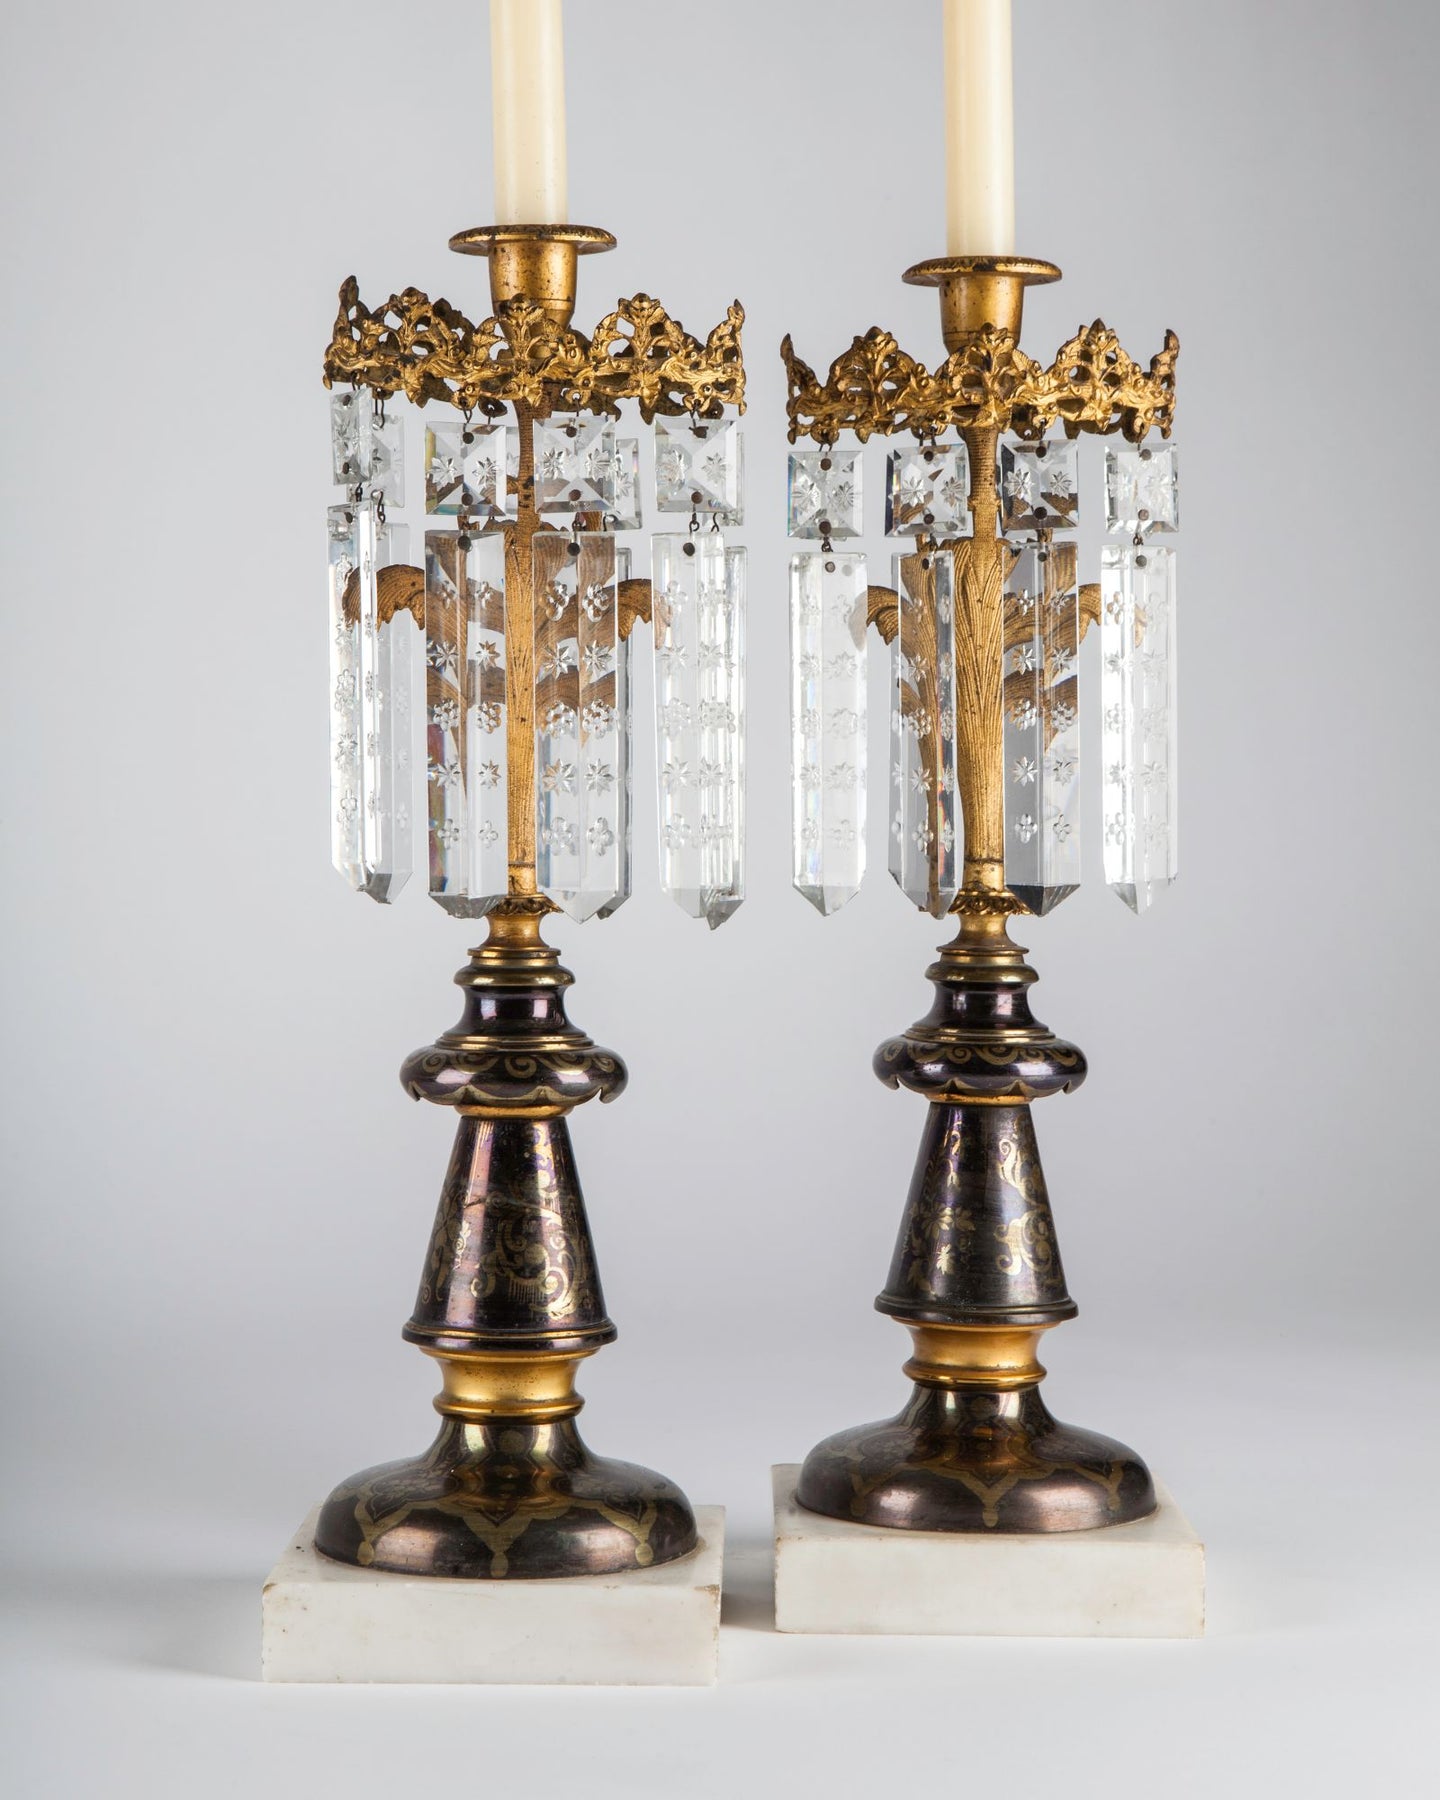 Antique Brass Girandole Two-Candle Candelabra Crystal Prisms Marble Base x2